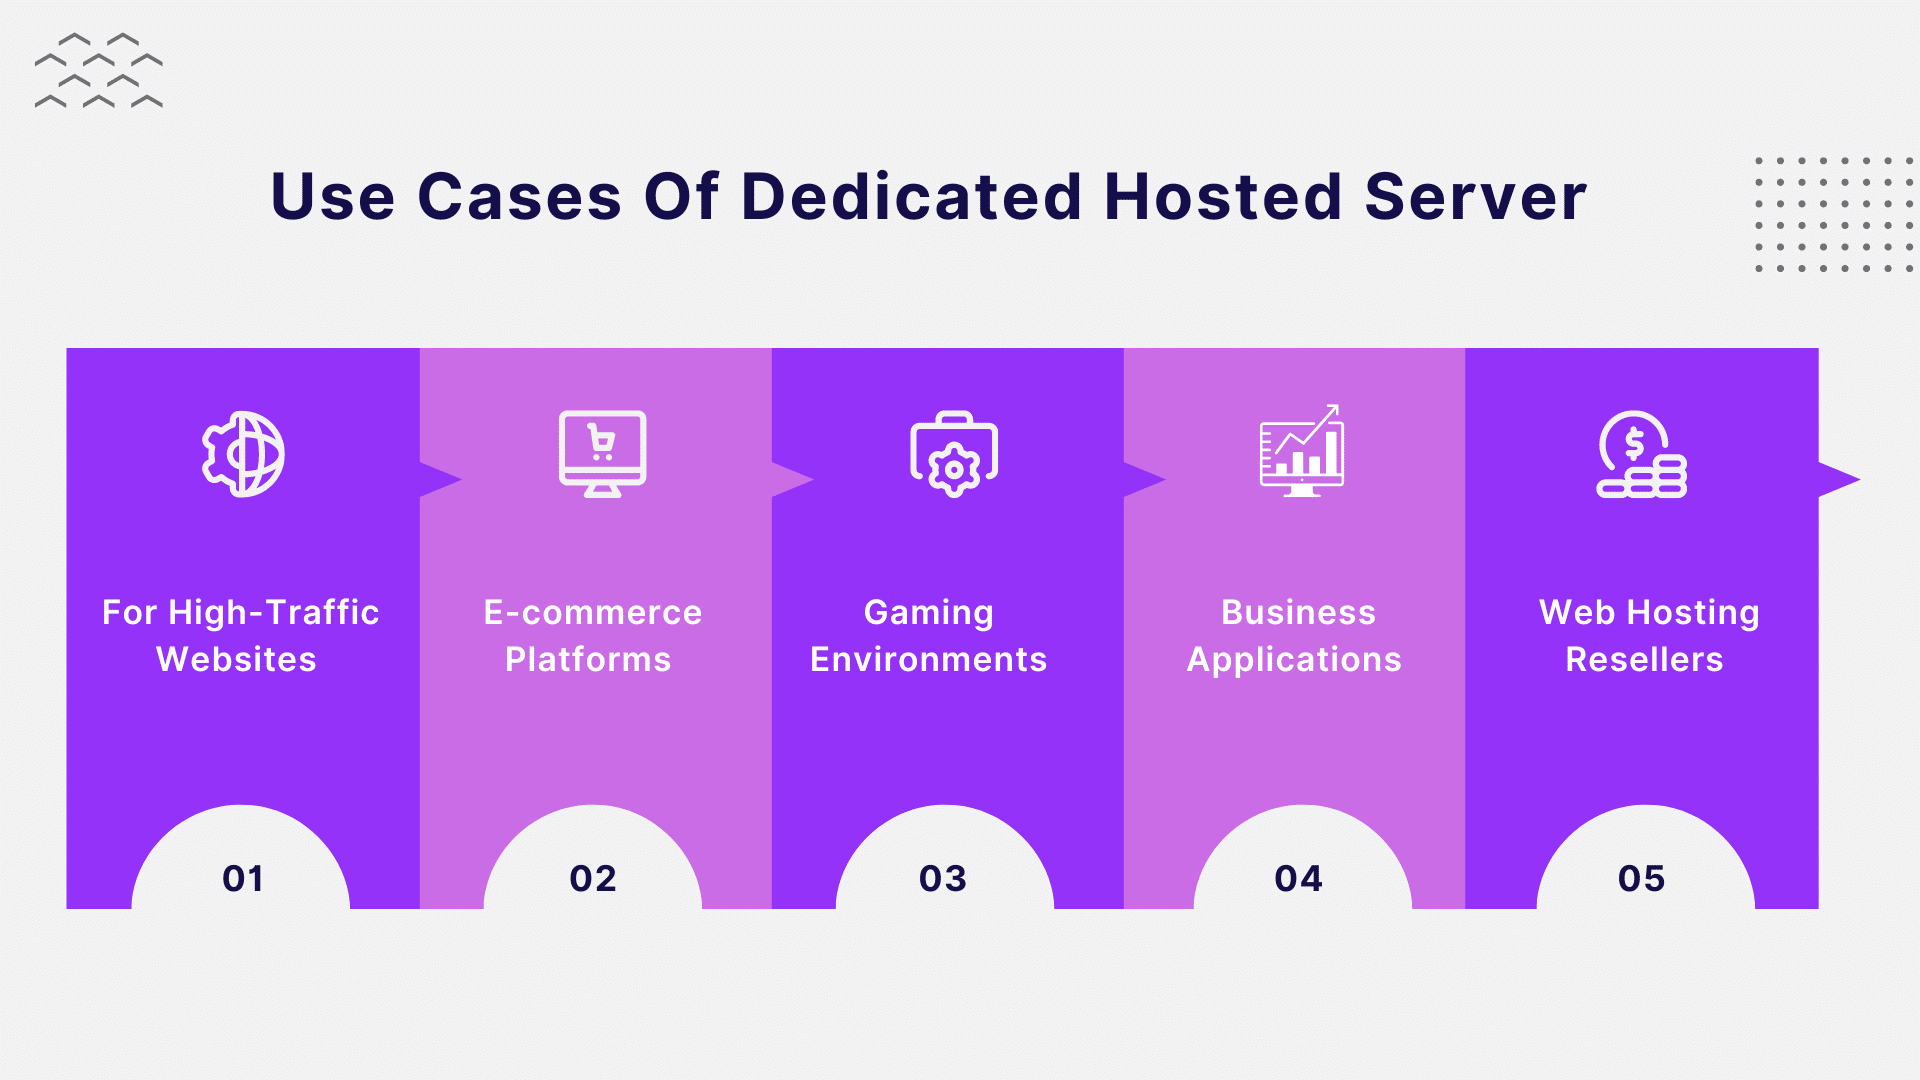 Use Cases Of Dedicated Hosted Server